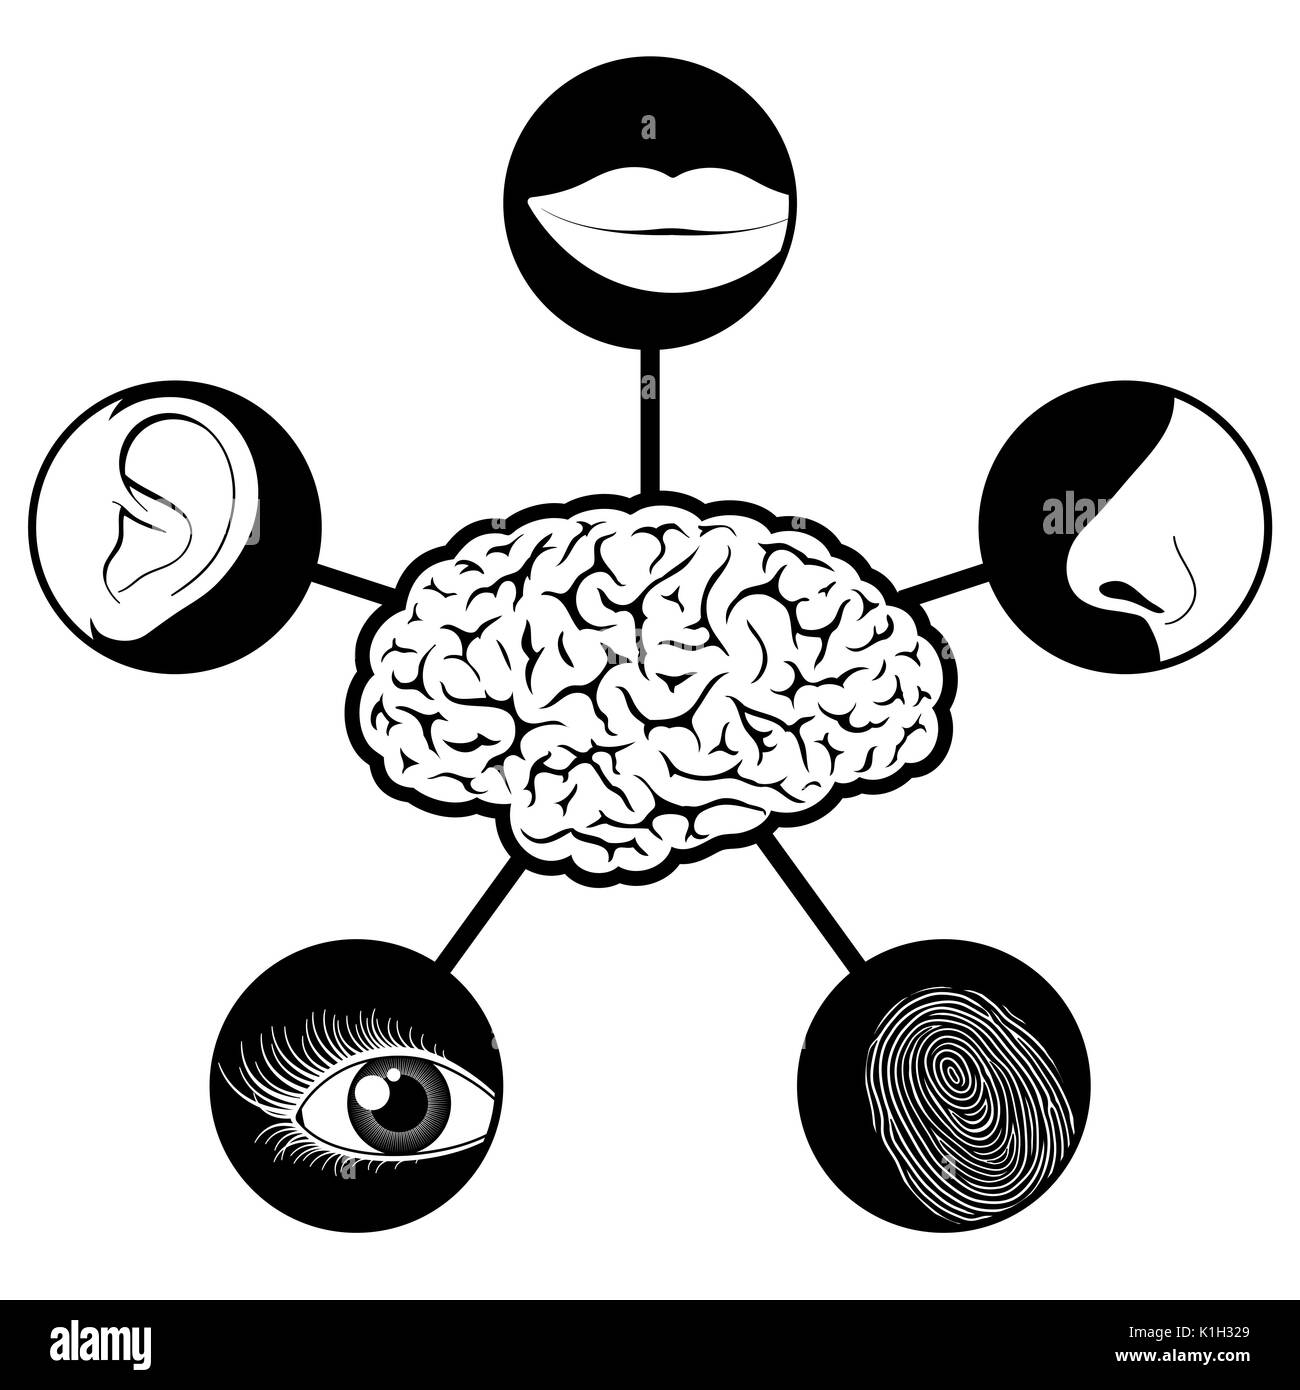 Five senses icons with human brain - illustration Stock Vector